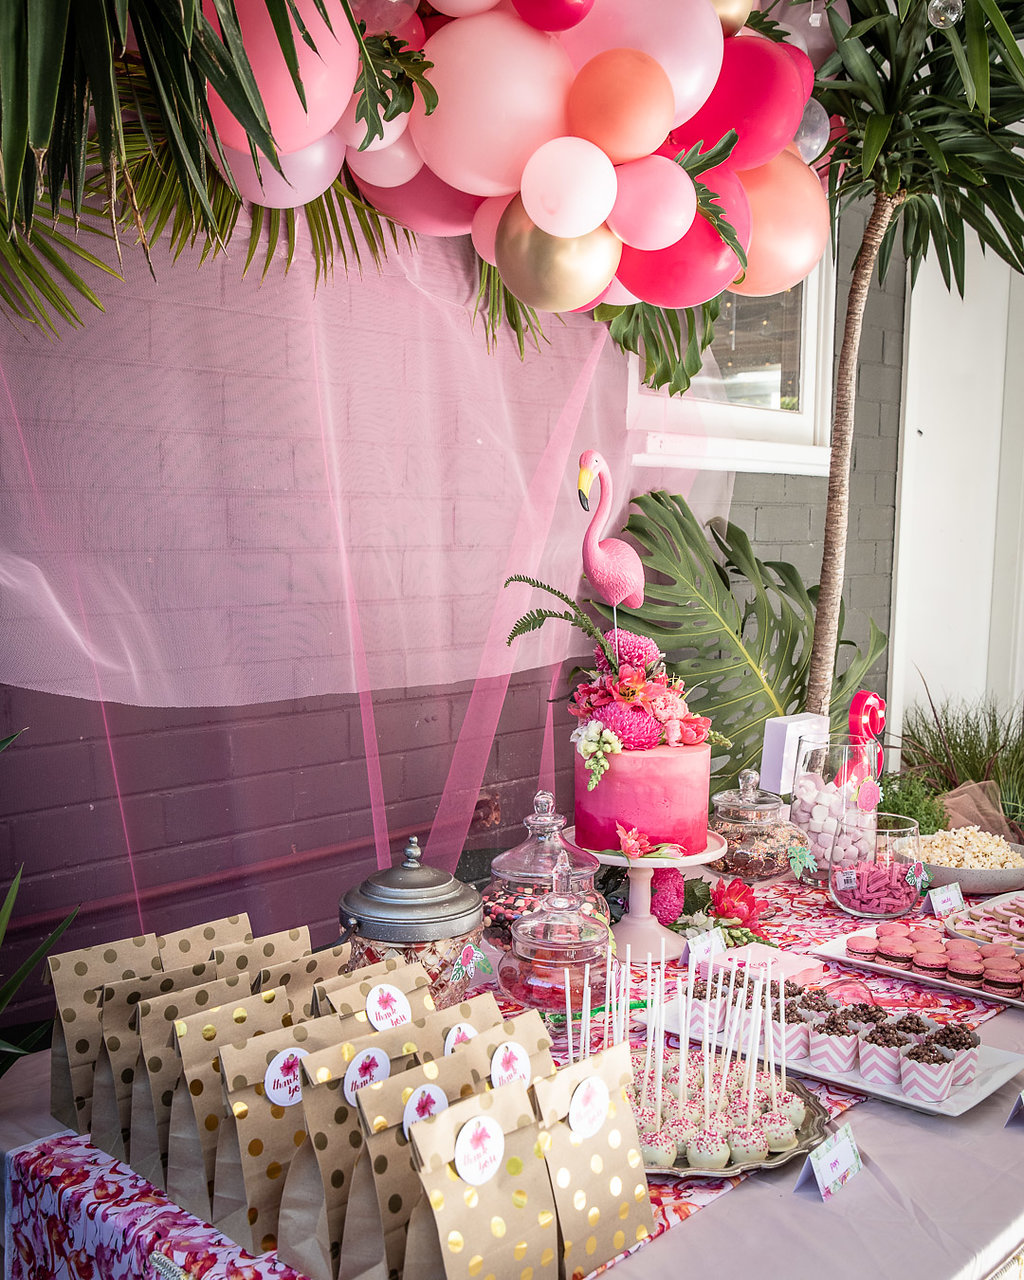 Dessert table at a flamingo themed birthday party